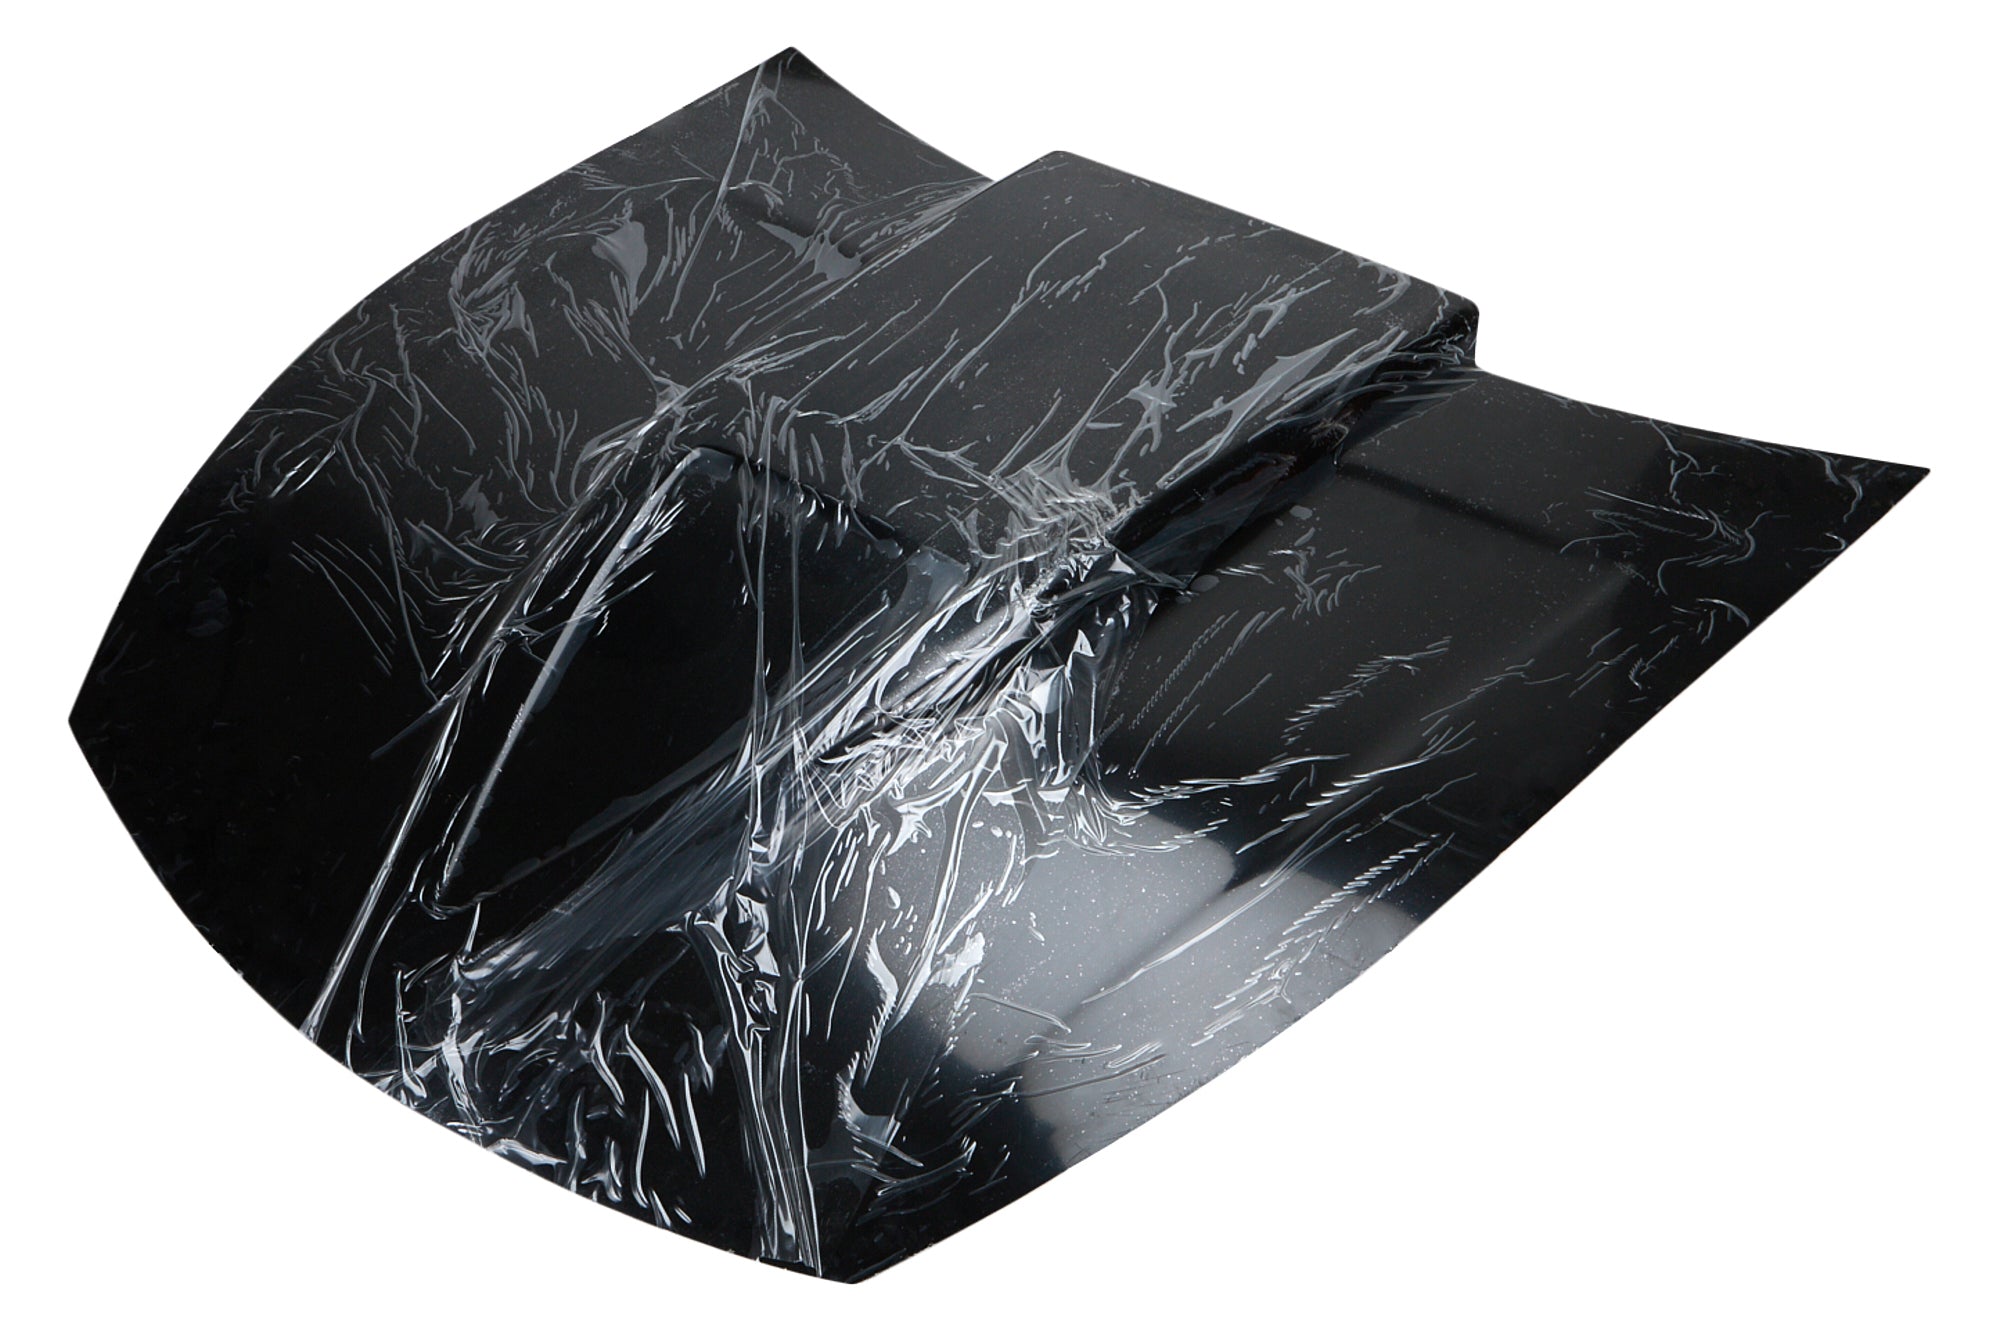 Fivestar Scooped Hood Advanced Lightweight Composite Body Panels and Components Hoods main image